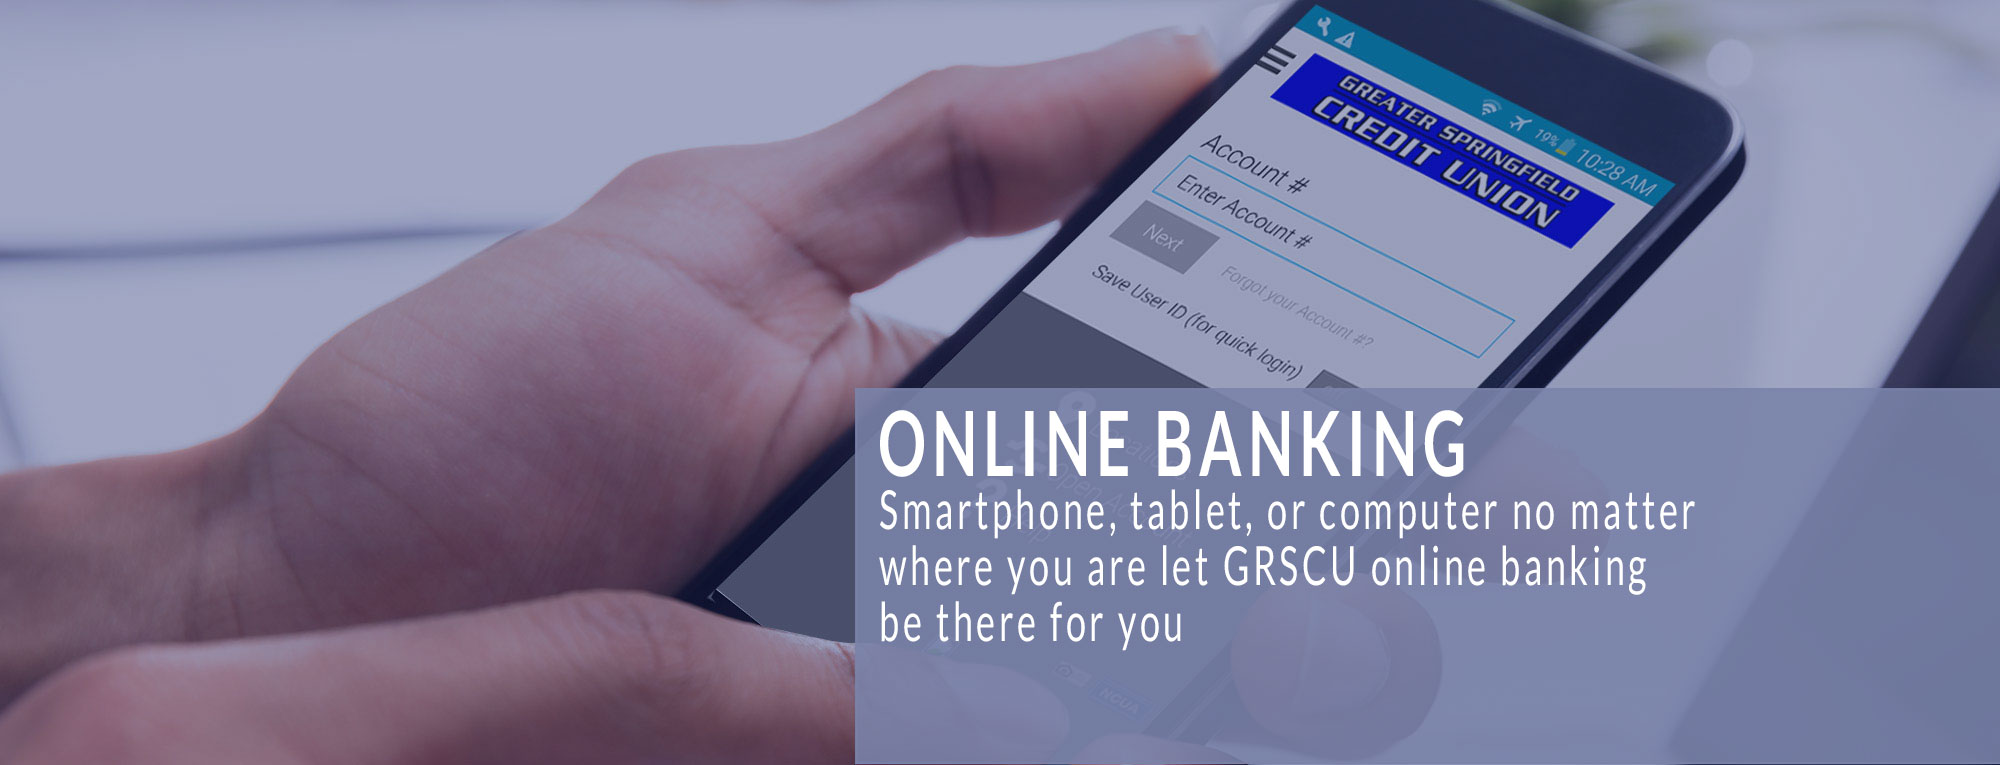 Online Banking - Smartphone, tablet, or computer no matter where you are let GRSCU onling banking be there for you.